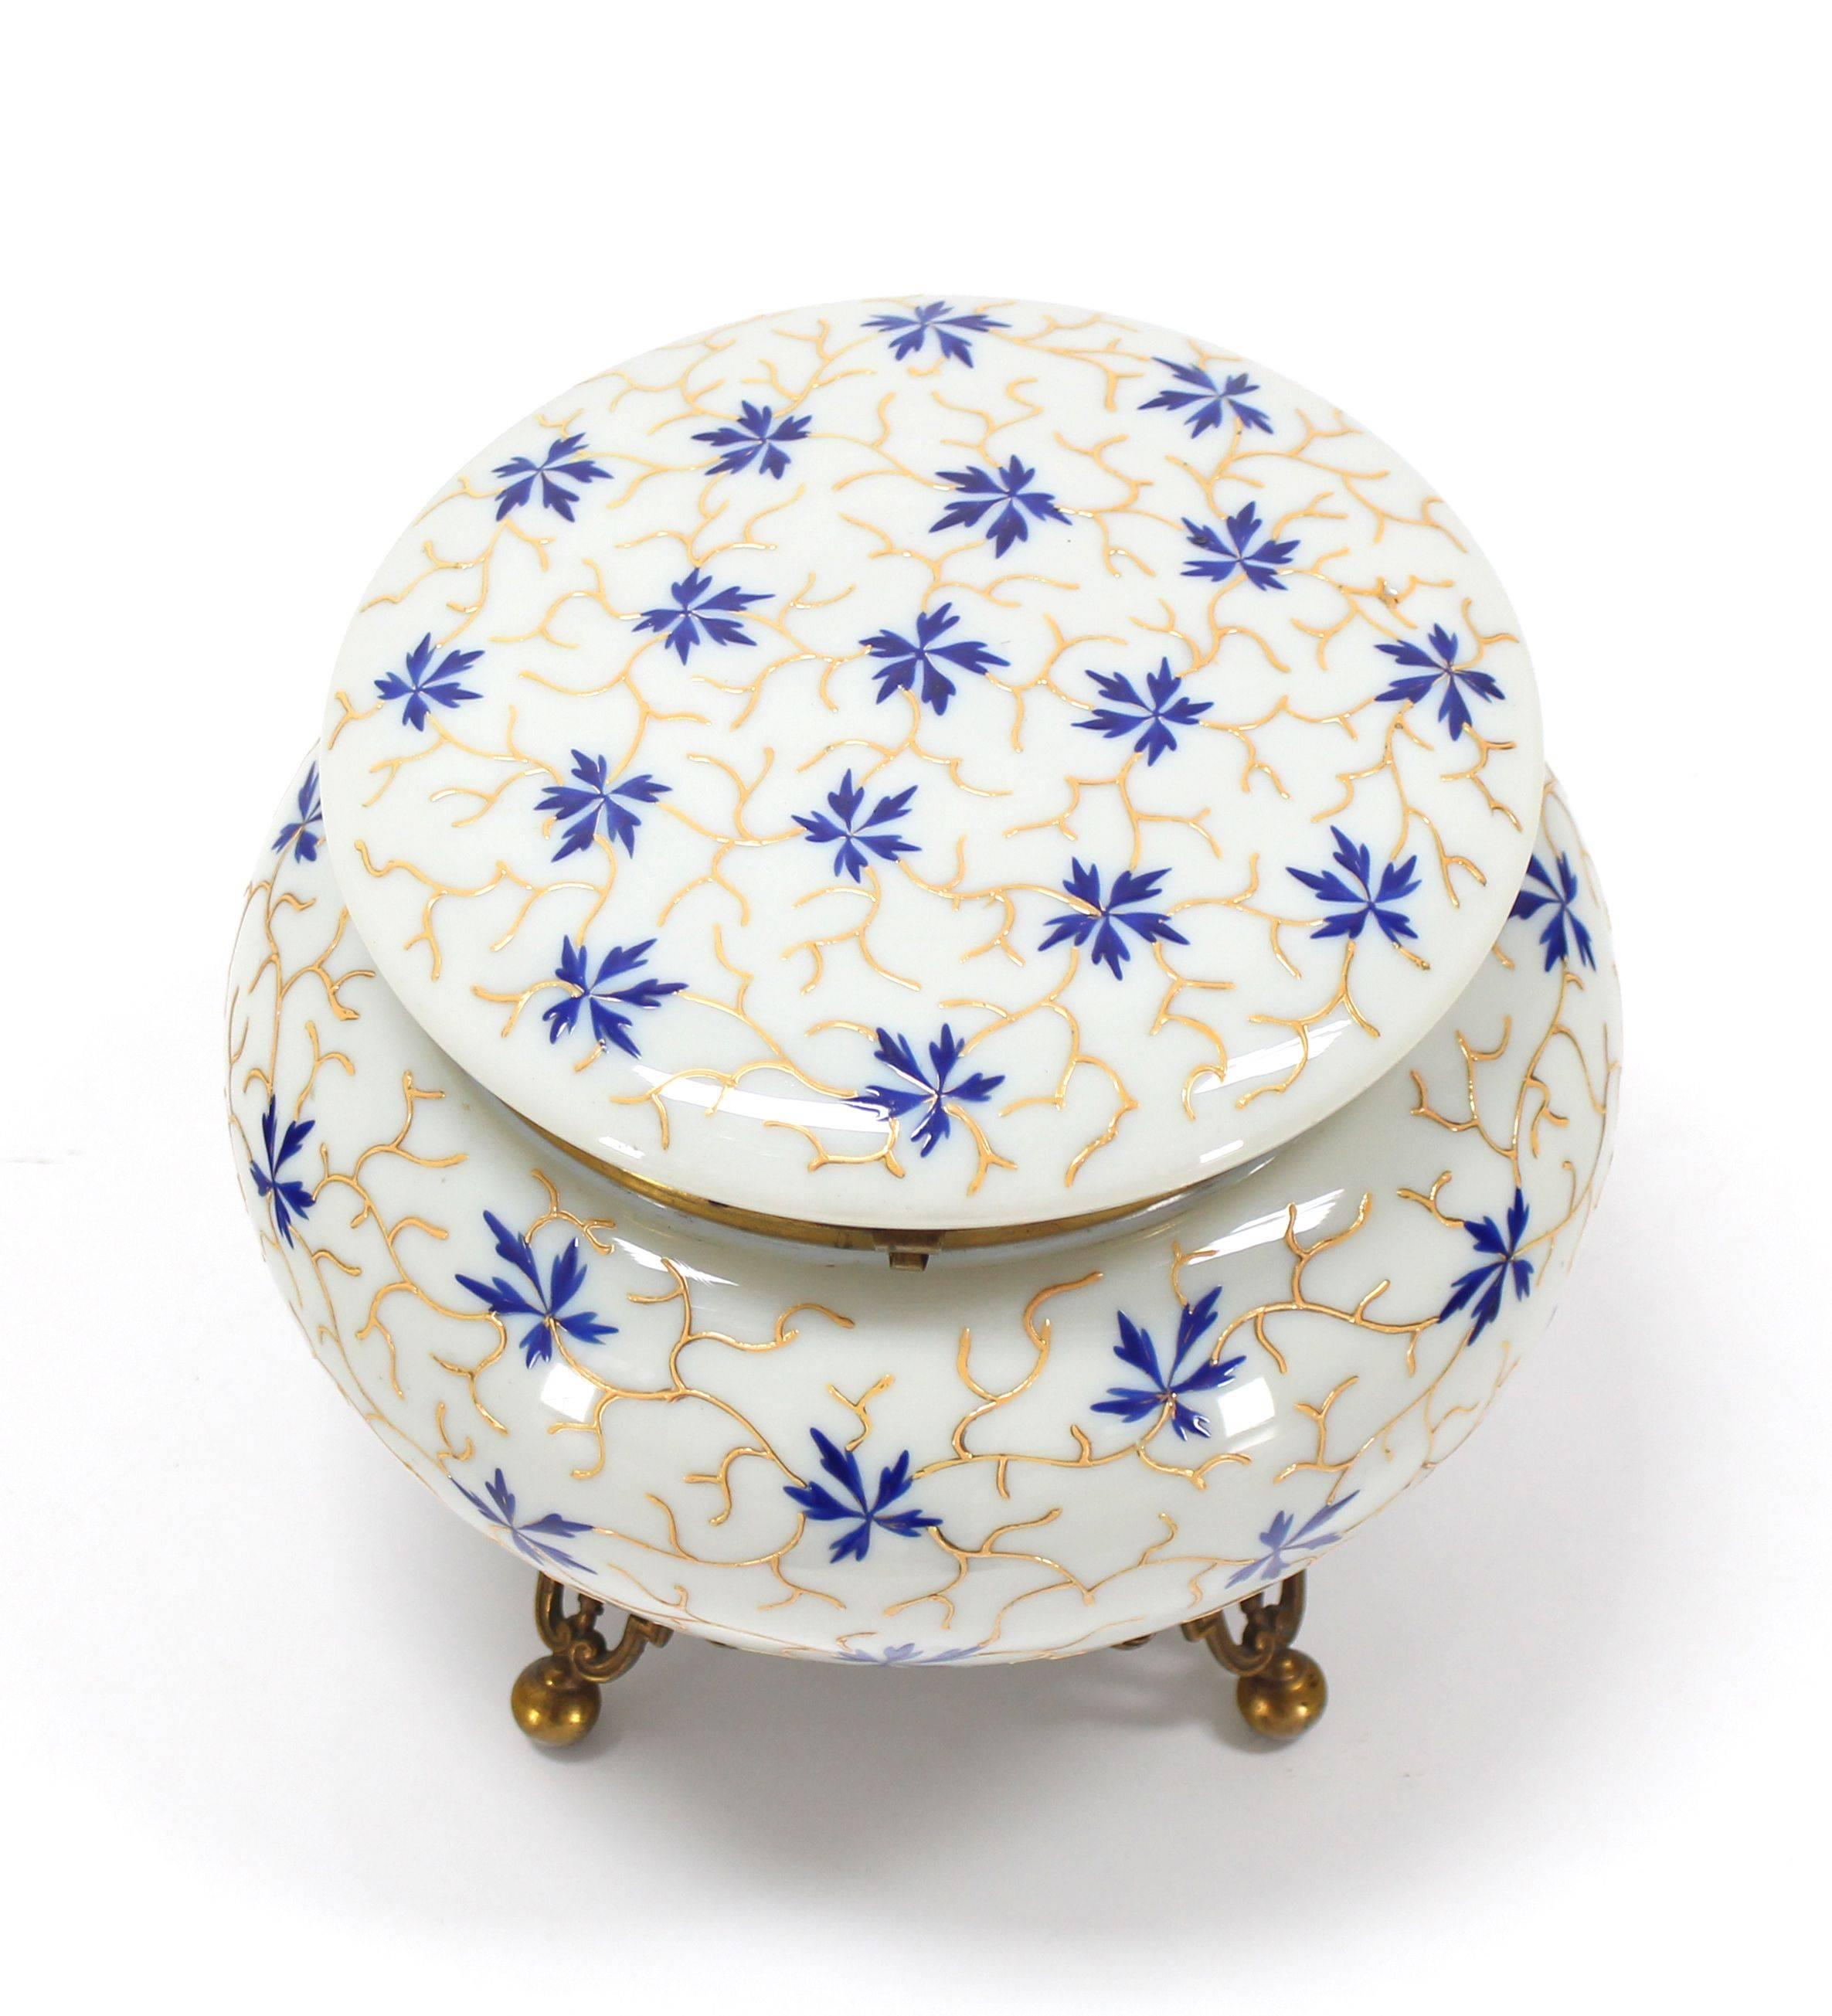 Large Enameled Painted Floral Pattern Art Glass Round Dresser Box In Excellent Condition For Sale In Rockaway, NJ